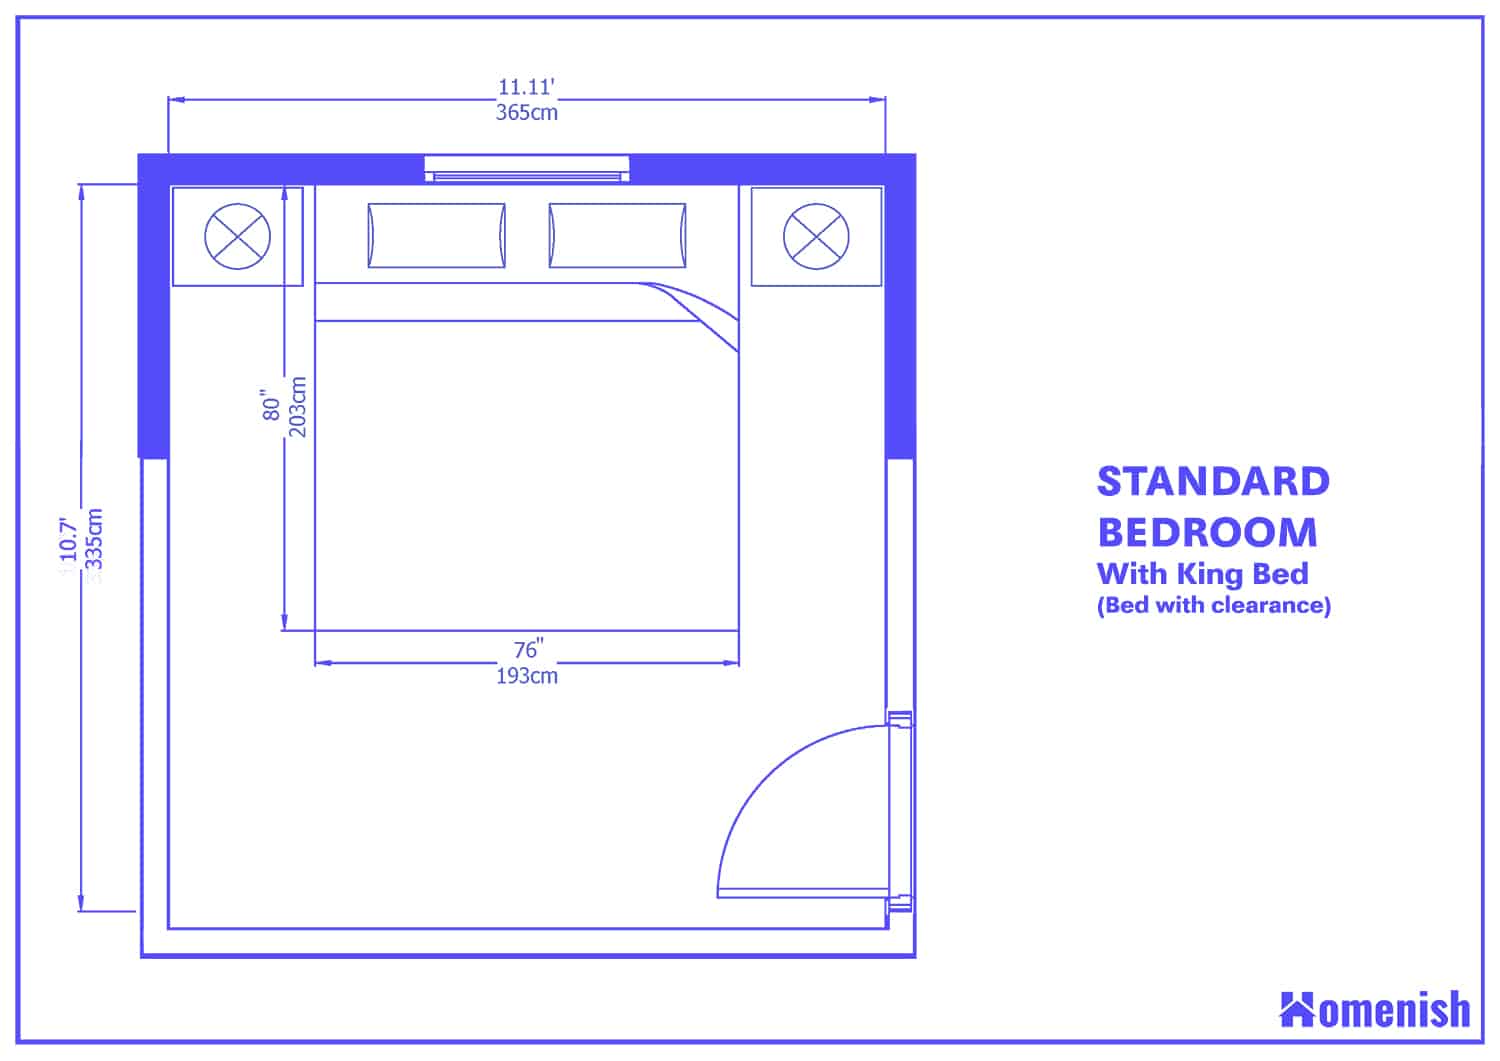 Average Bedroom Size And Layout Guide, Is A King Bed Square